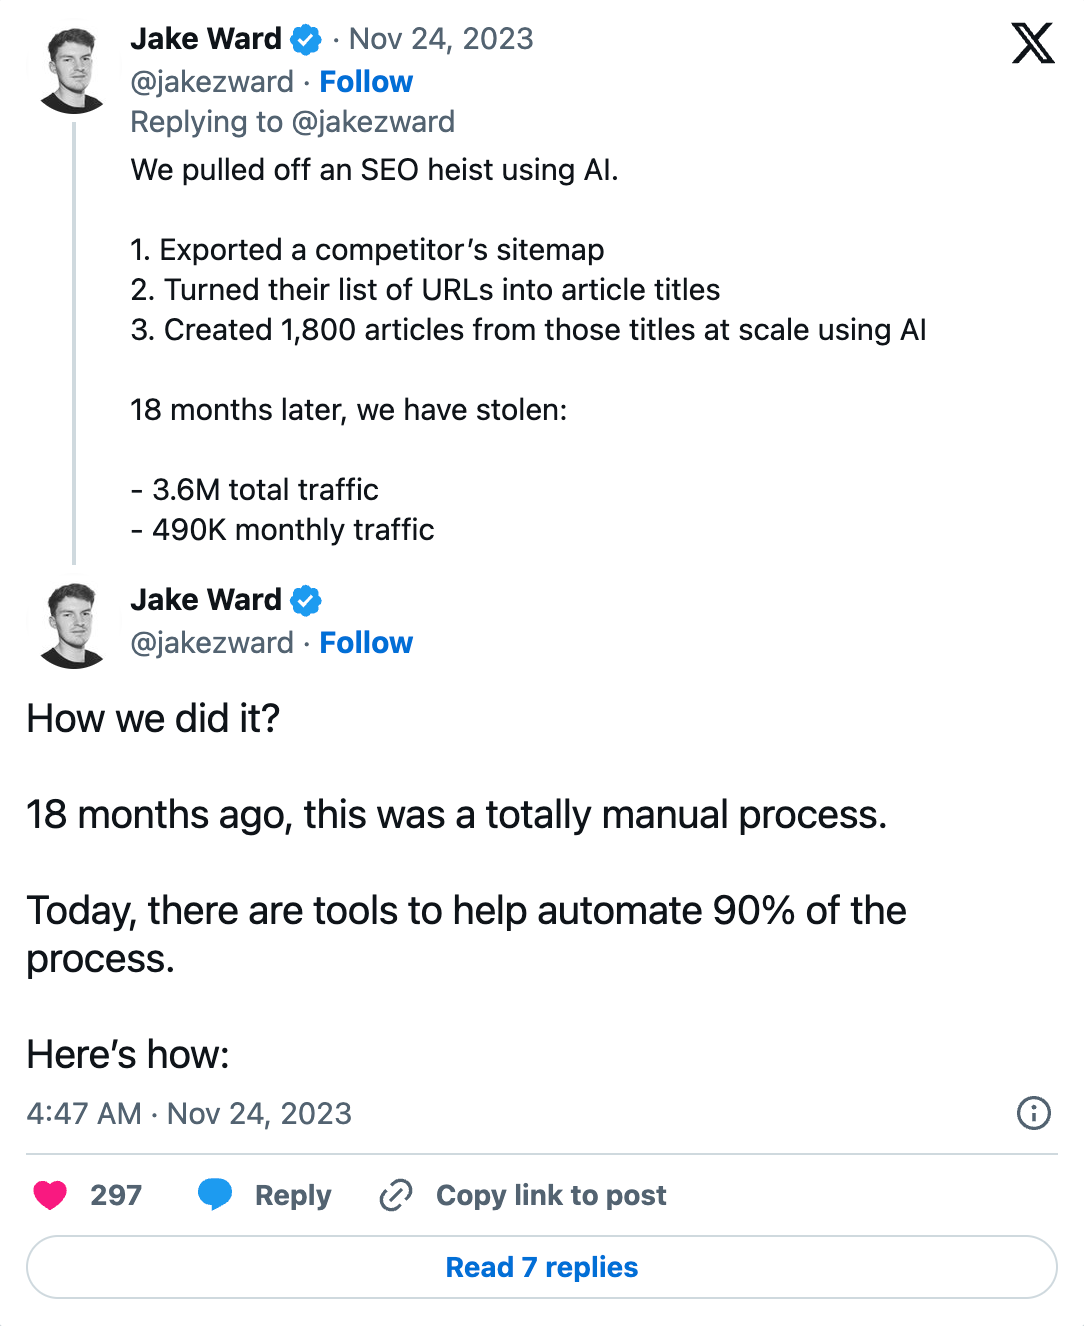 Two Tweets, sorry posts on X from user @jakezward that read, “We pulled off an SEO heist using AI. 1. Exported a competitor’s sitemap 2. Turned their list of URLs into article titles 3. Created 1,800 articles from those titles at scale using AI 18 months later, we have stolen: - 3.6M total traffic - 490K monthly traffic” and “How we did it? 18 months ago, this was a totally manual process. Today, there are tools to help automate 90% of the process. Here’s how:”